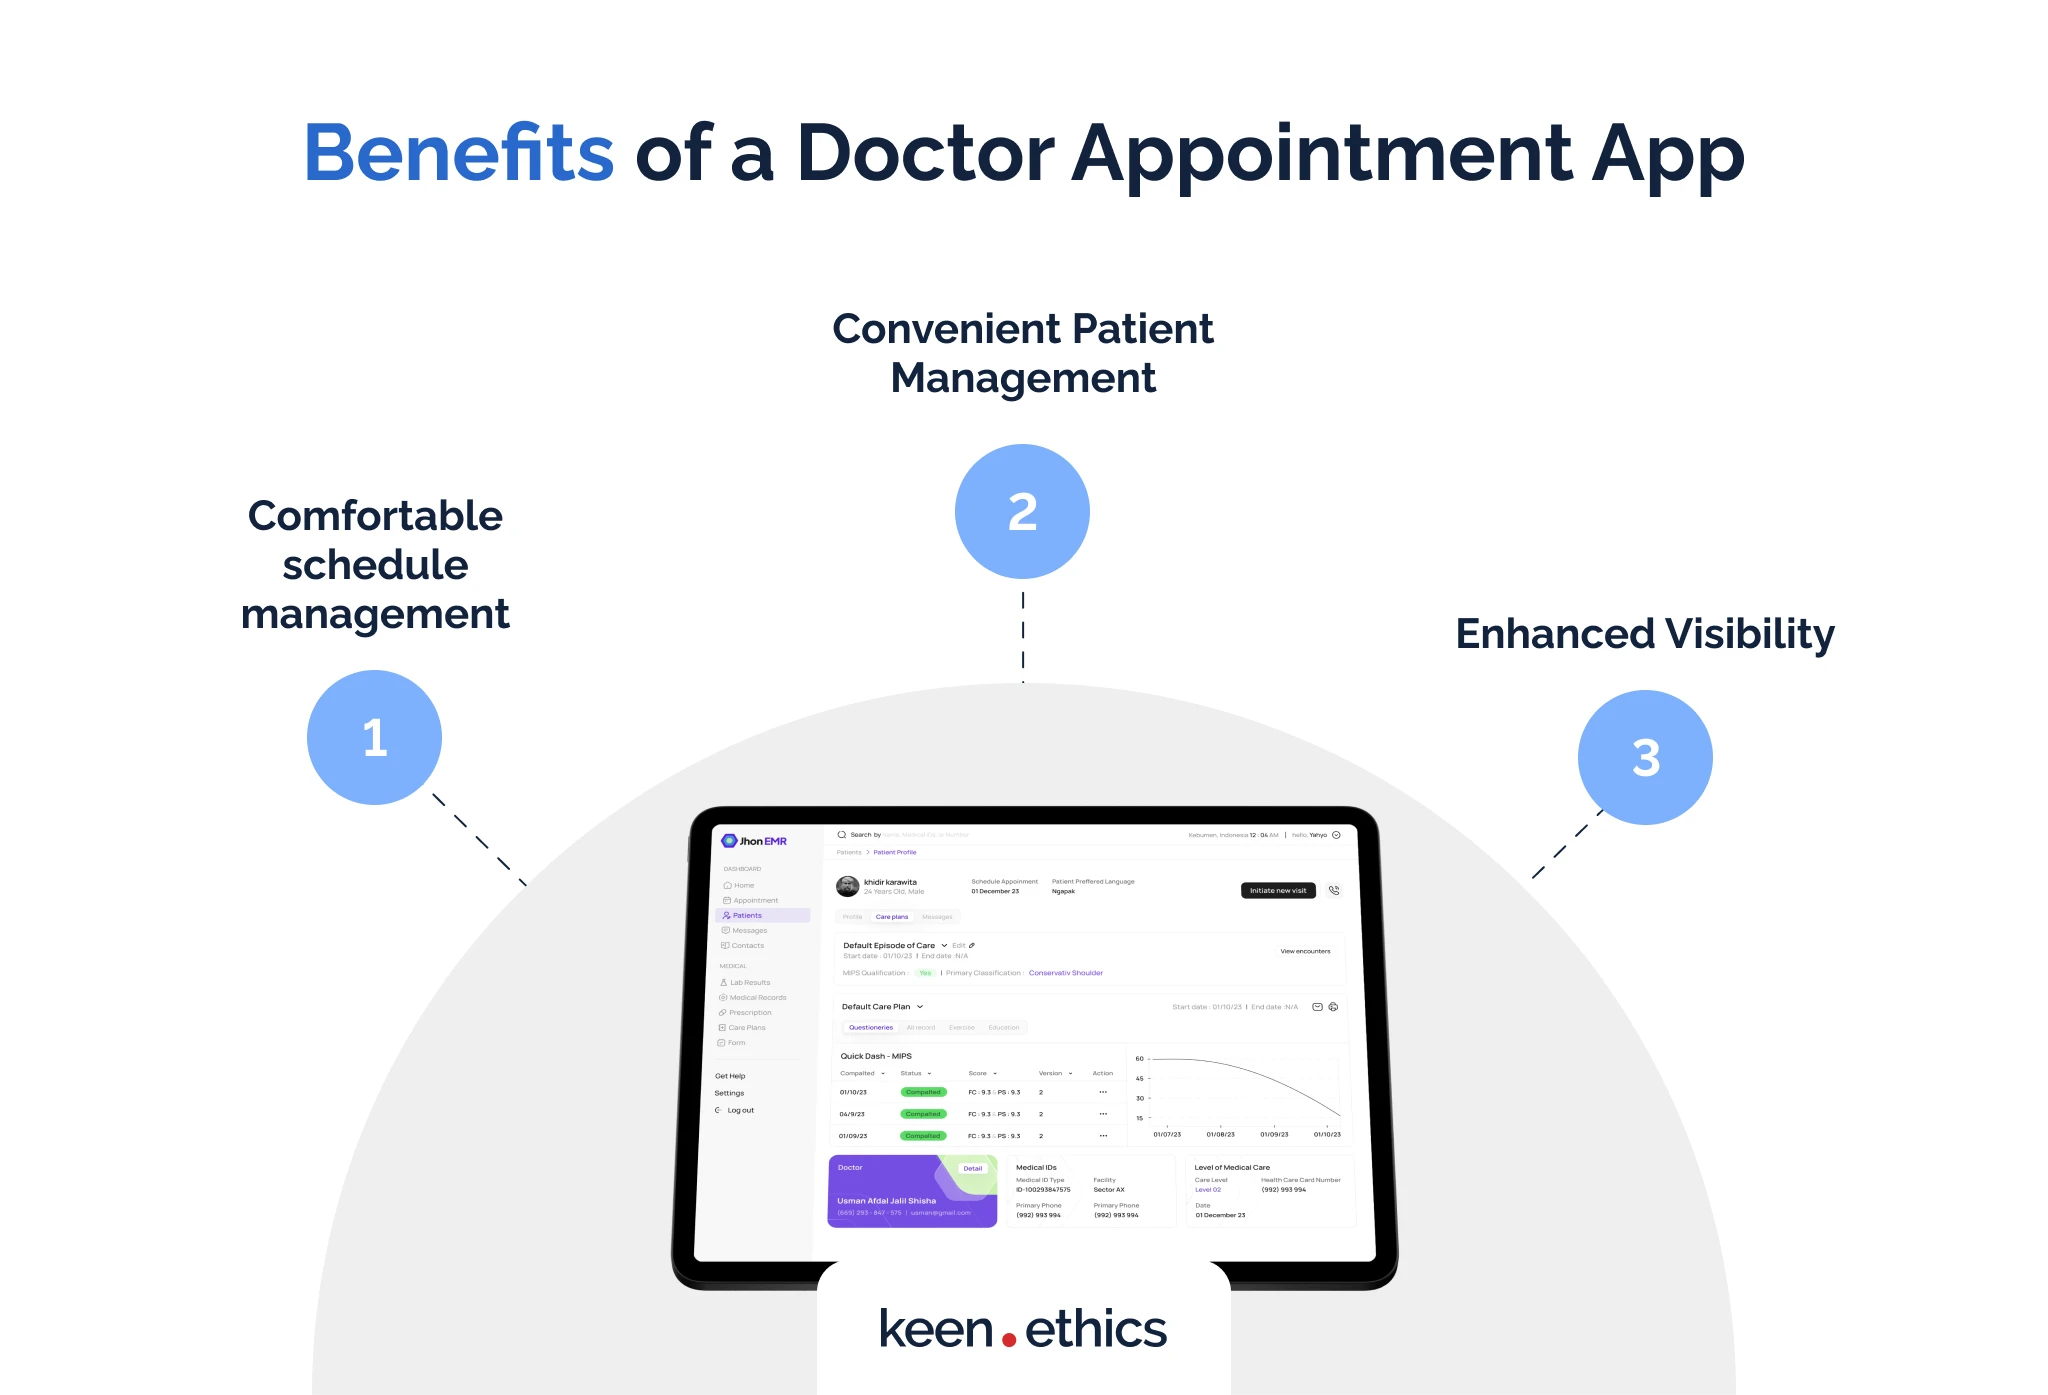 Benefits of a Doctor Appointment App